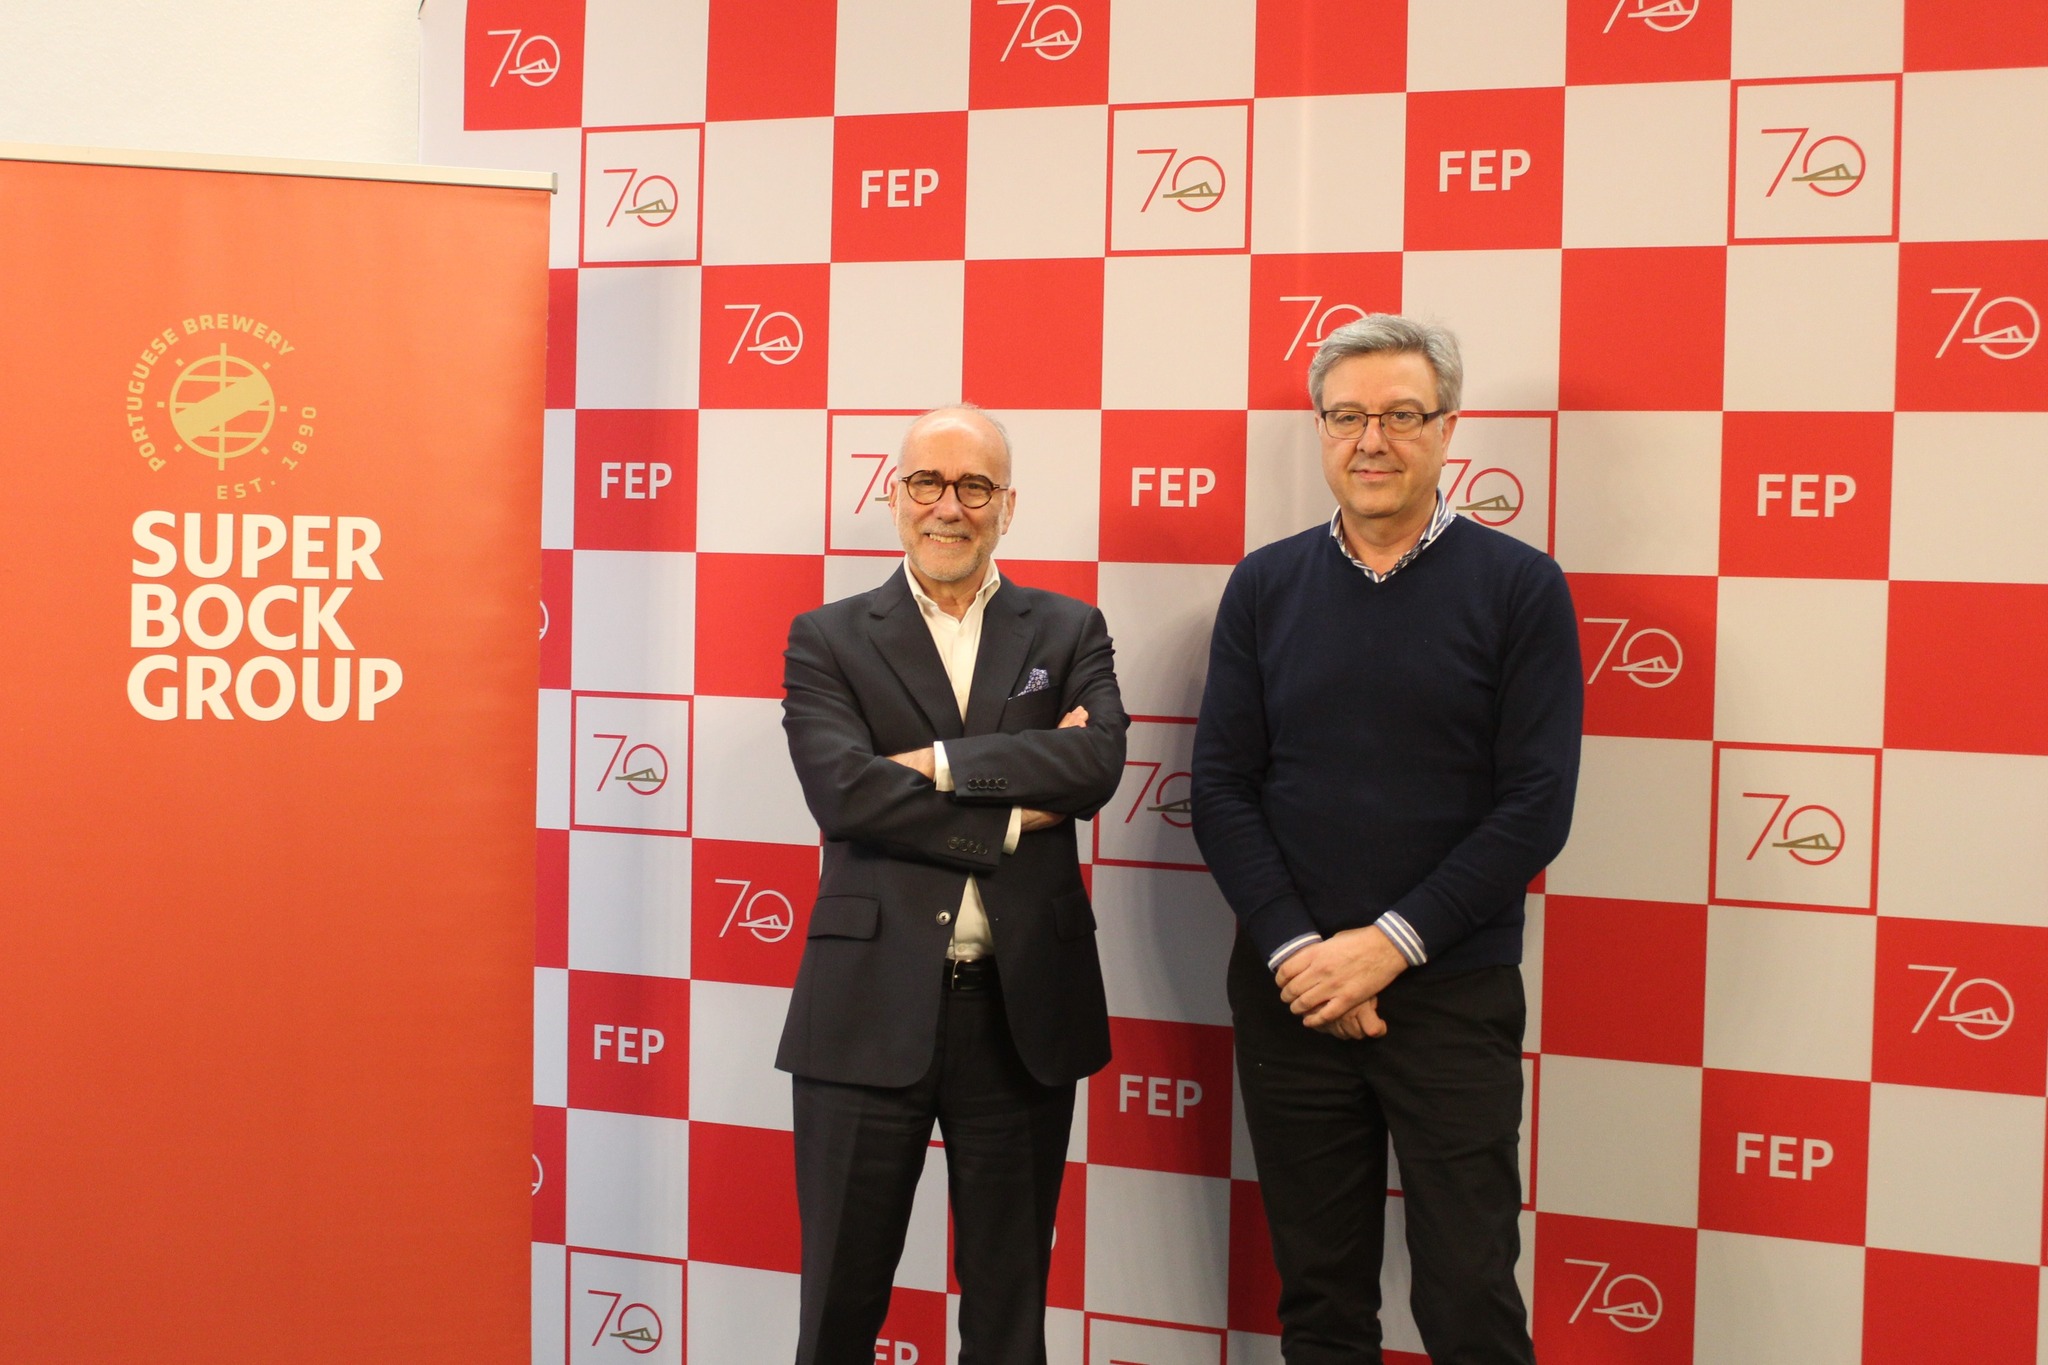 FEP and Super Bock Group promote excellence in scientific production